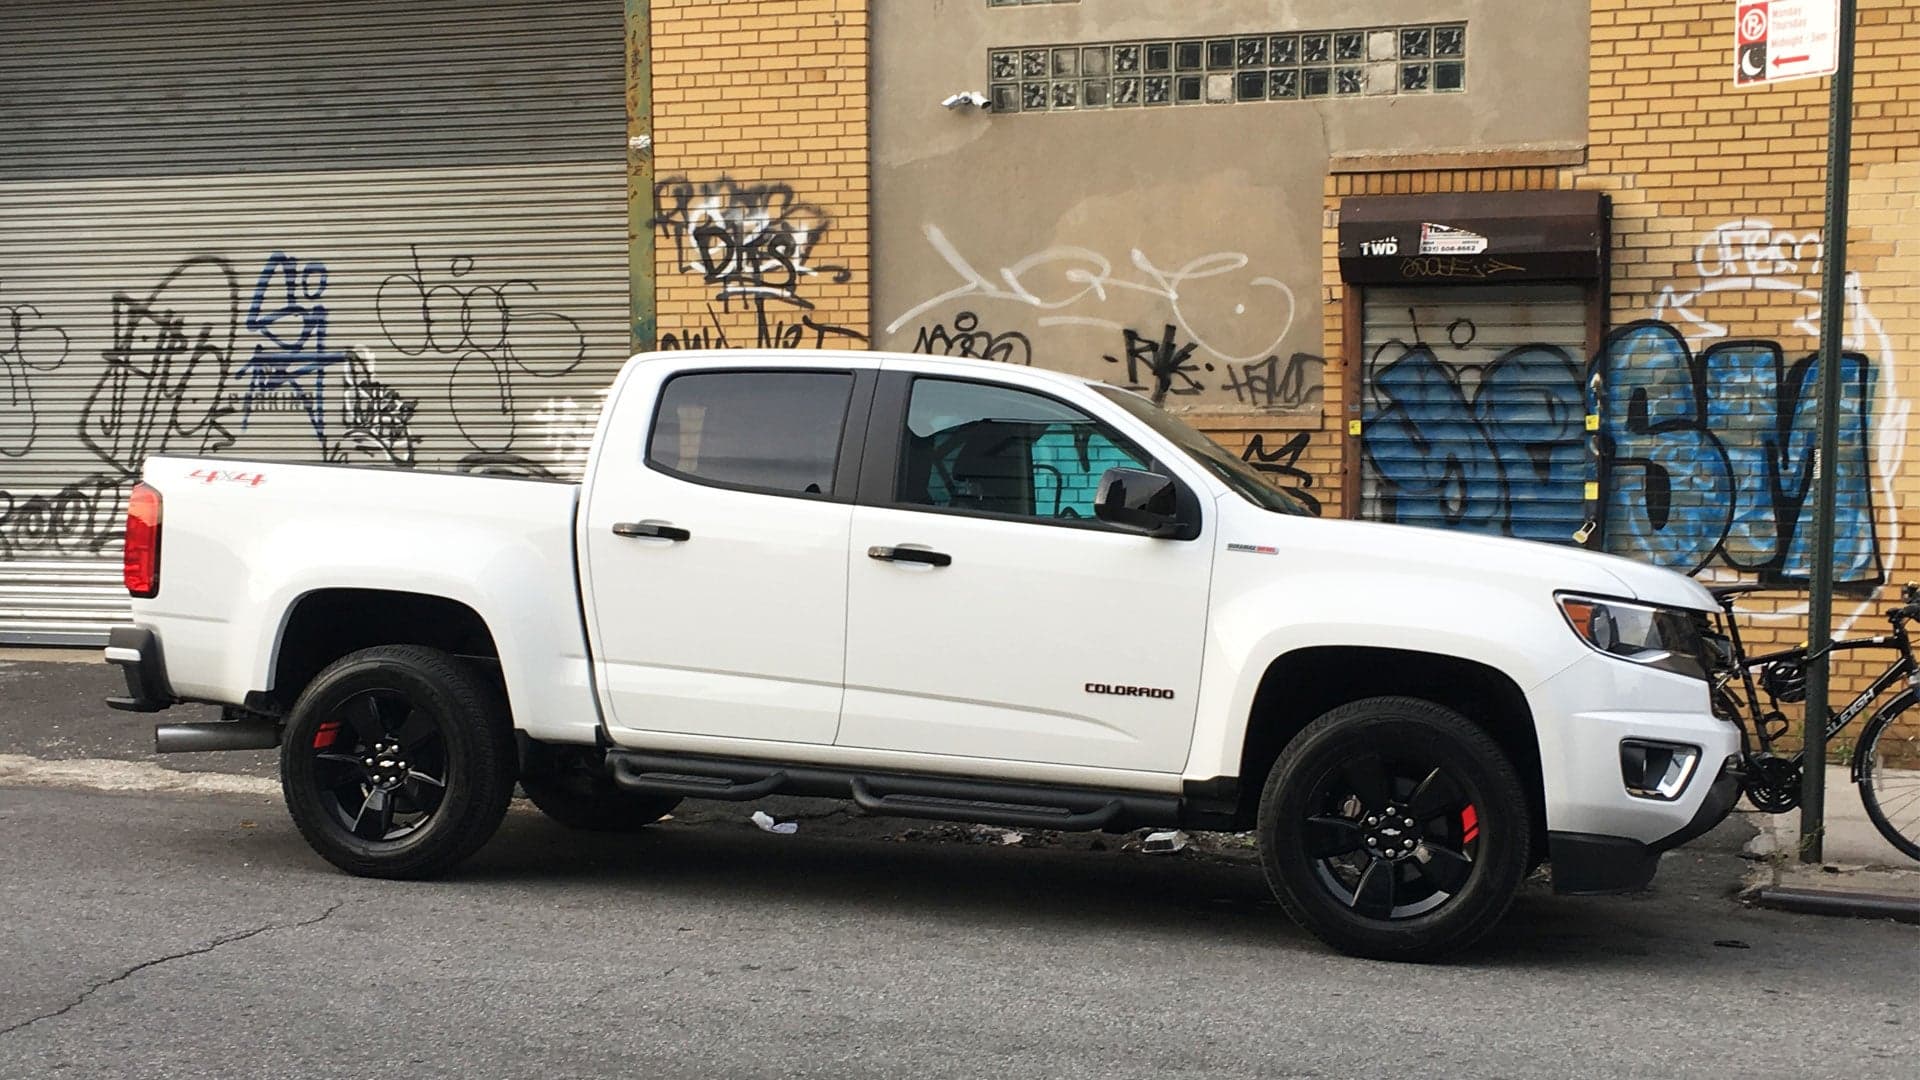 2018 Chevrolet Colorado 4WD LT Review: Pickup Truck Power Dramatically Boosts Your Productivity